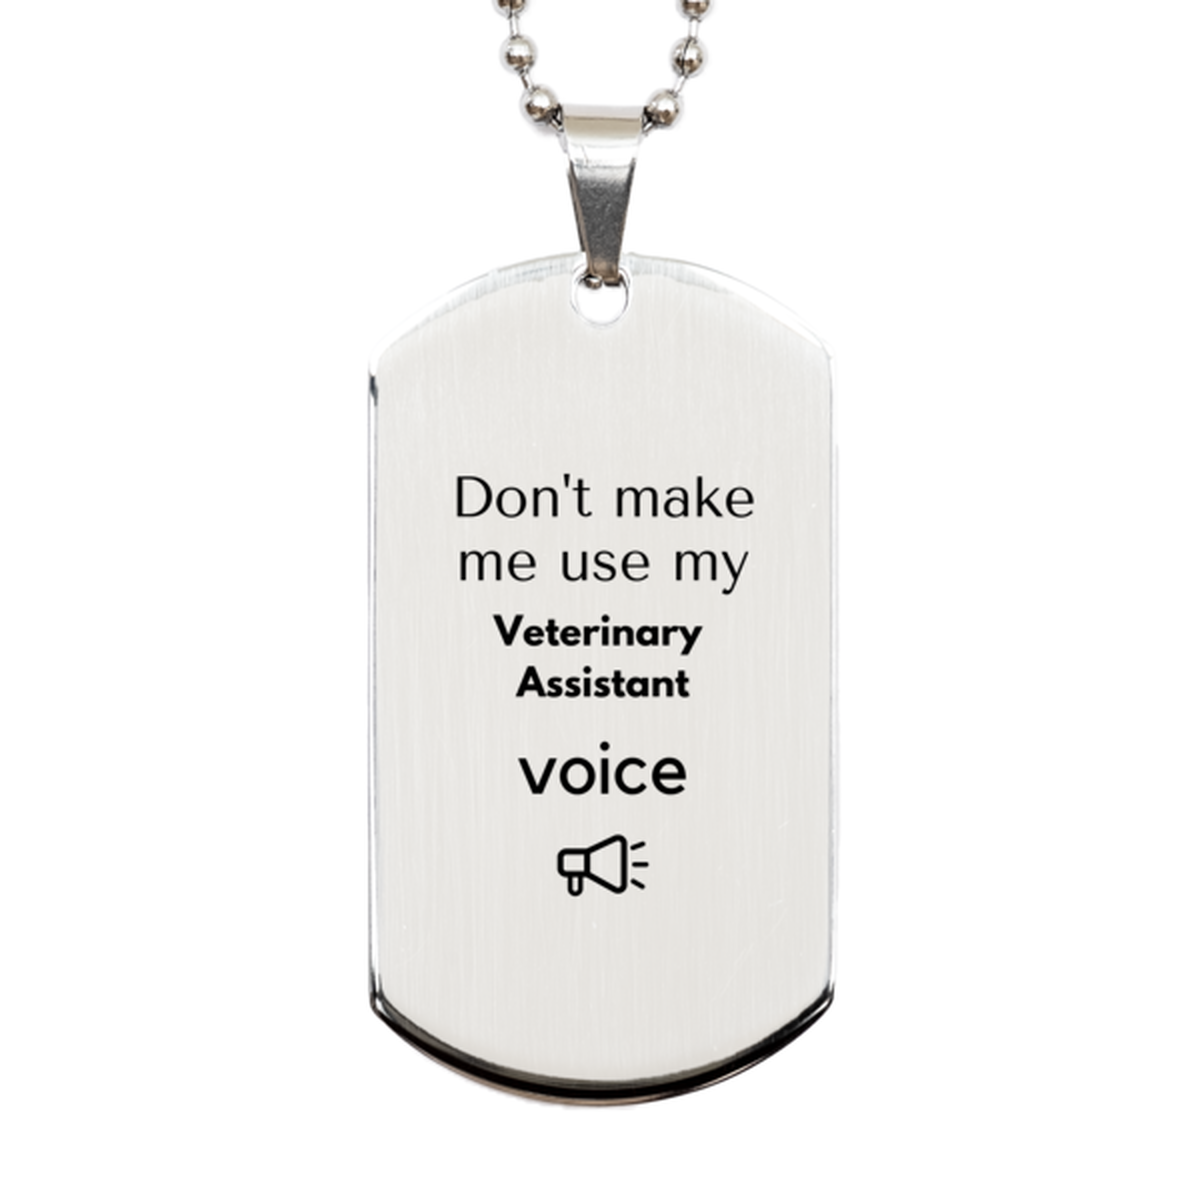 Don't make me use my Veterinary Assistant voice, Sarcasm Veterinary Assistant Gifts, Christmas Veterinary Assistant Silver Dog Tag Birthday Unique Gifts For Veterinary Assistant Coworkers, Men, Women, Colleague, Friends